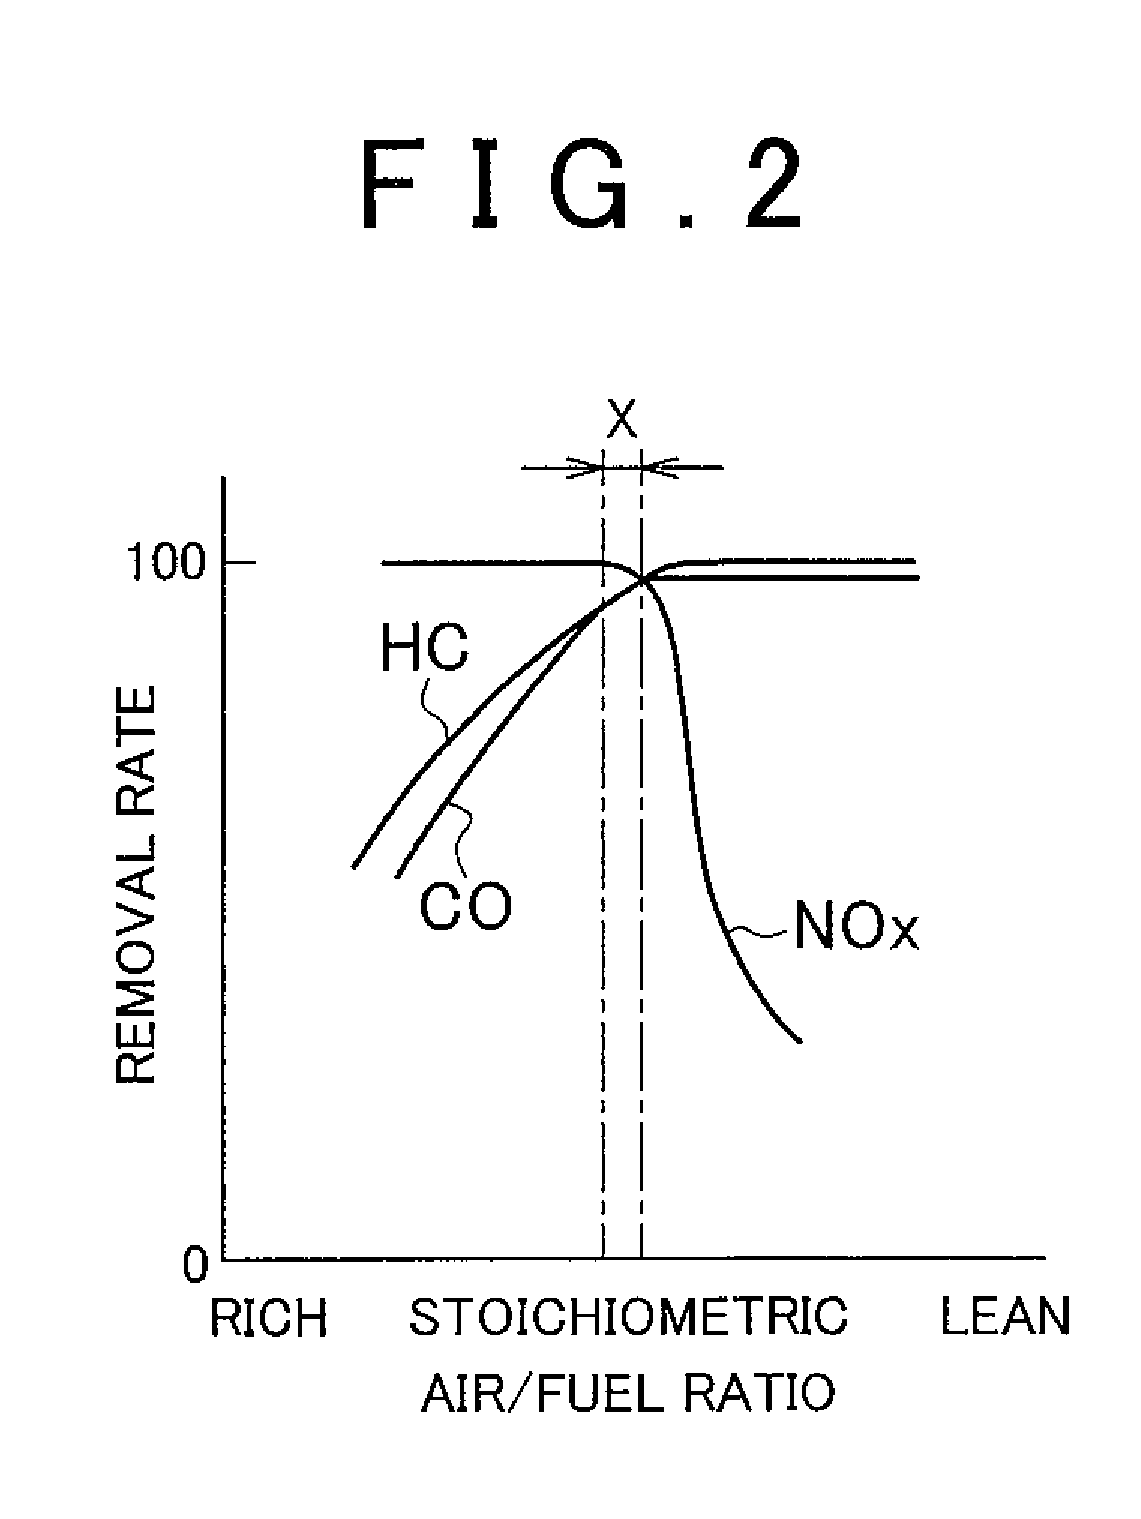 Multicylinder internal combustion engine, inter-cylinder air/fuel ratio imbalance determination apparatus, and method therefor